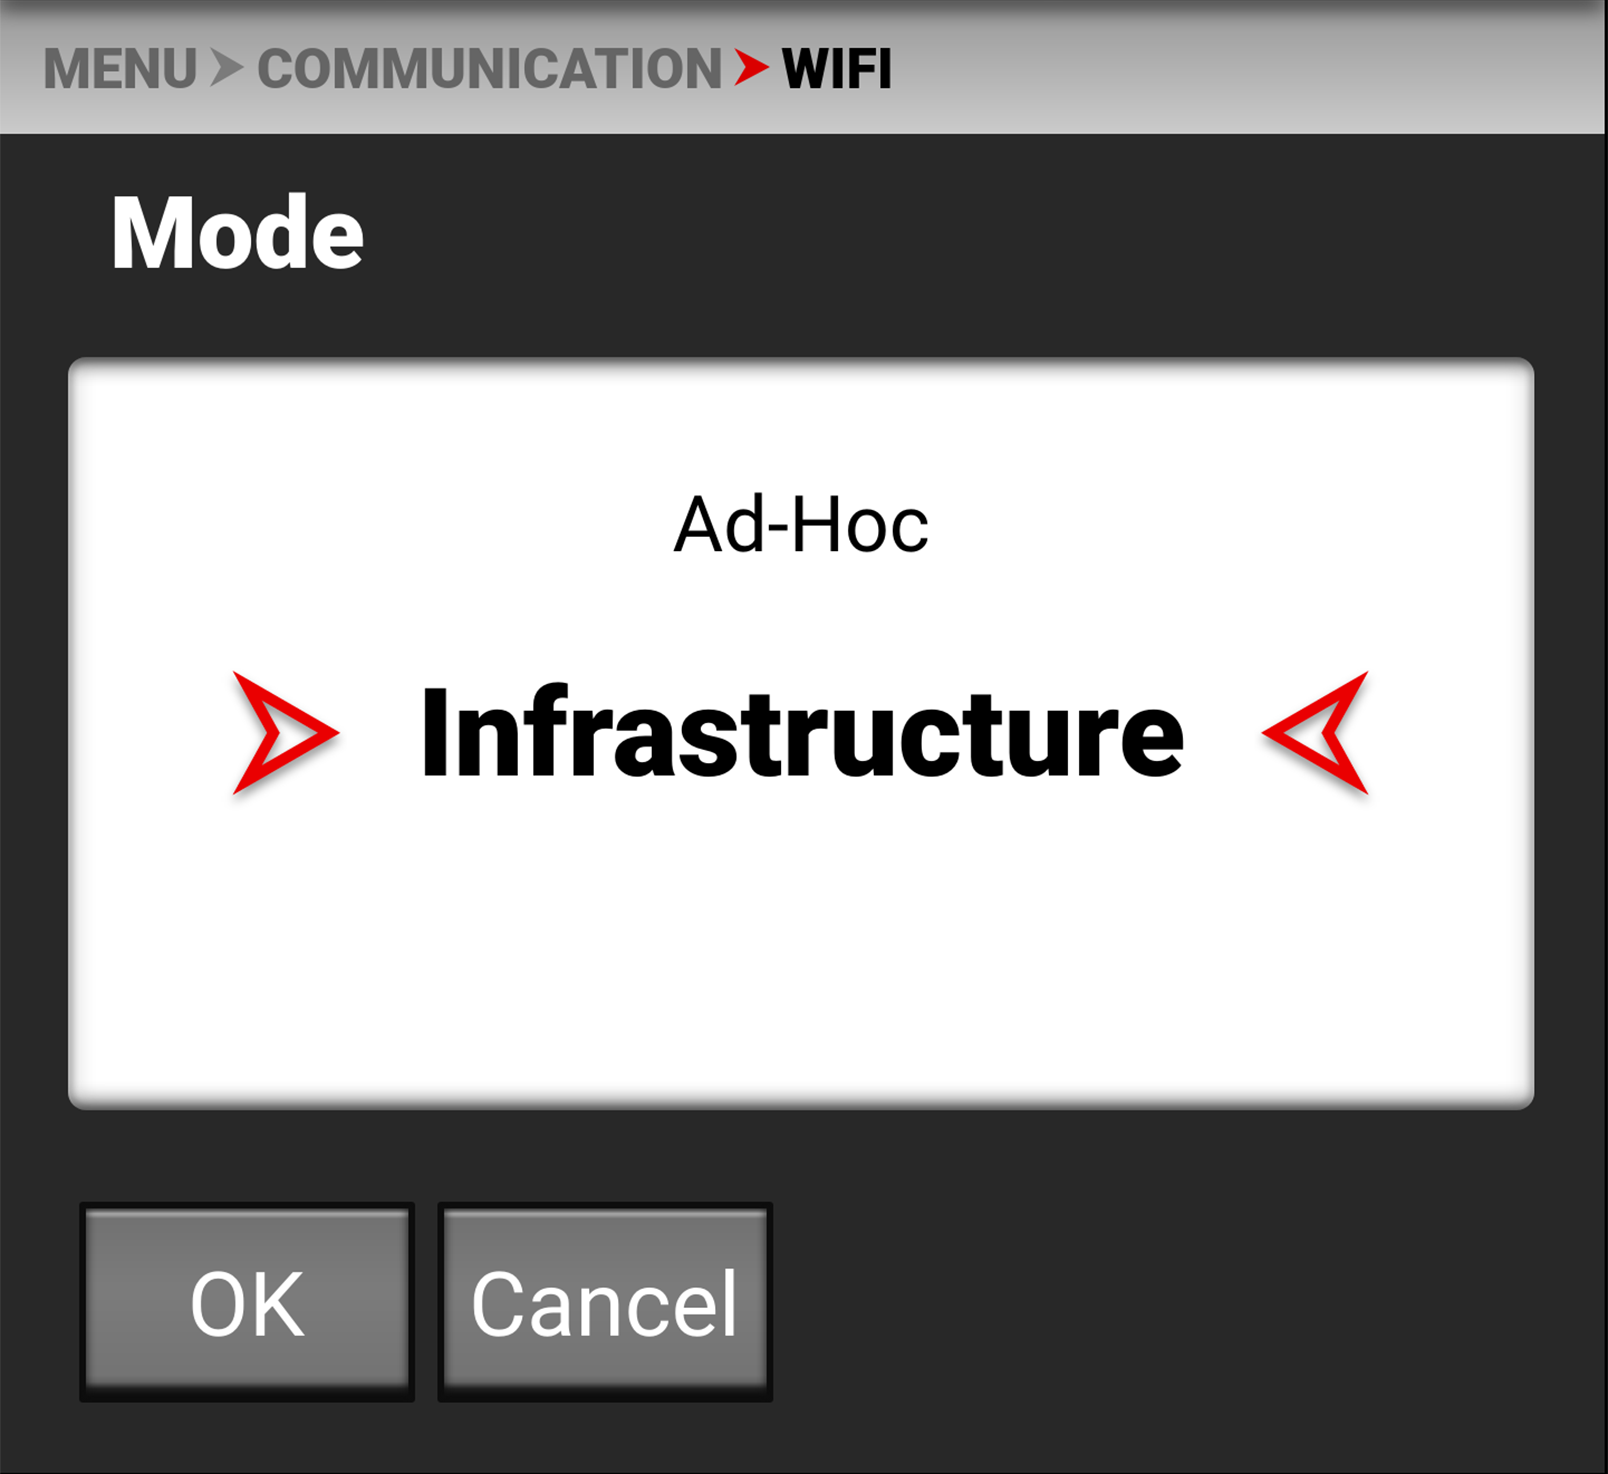 LCD_Comm_WiFi_Mode_I_5-18c.png